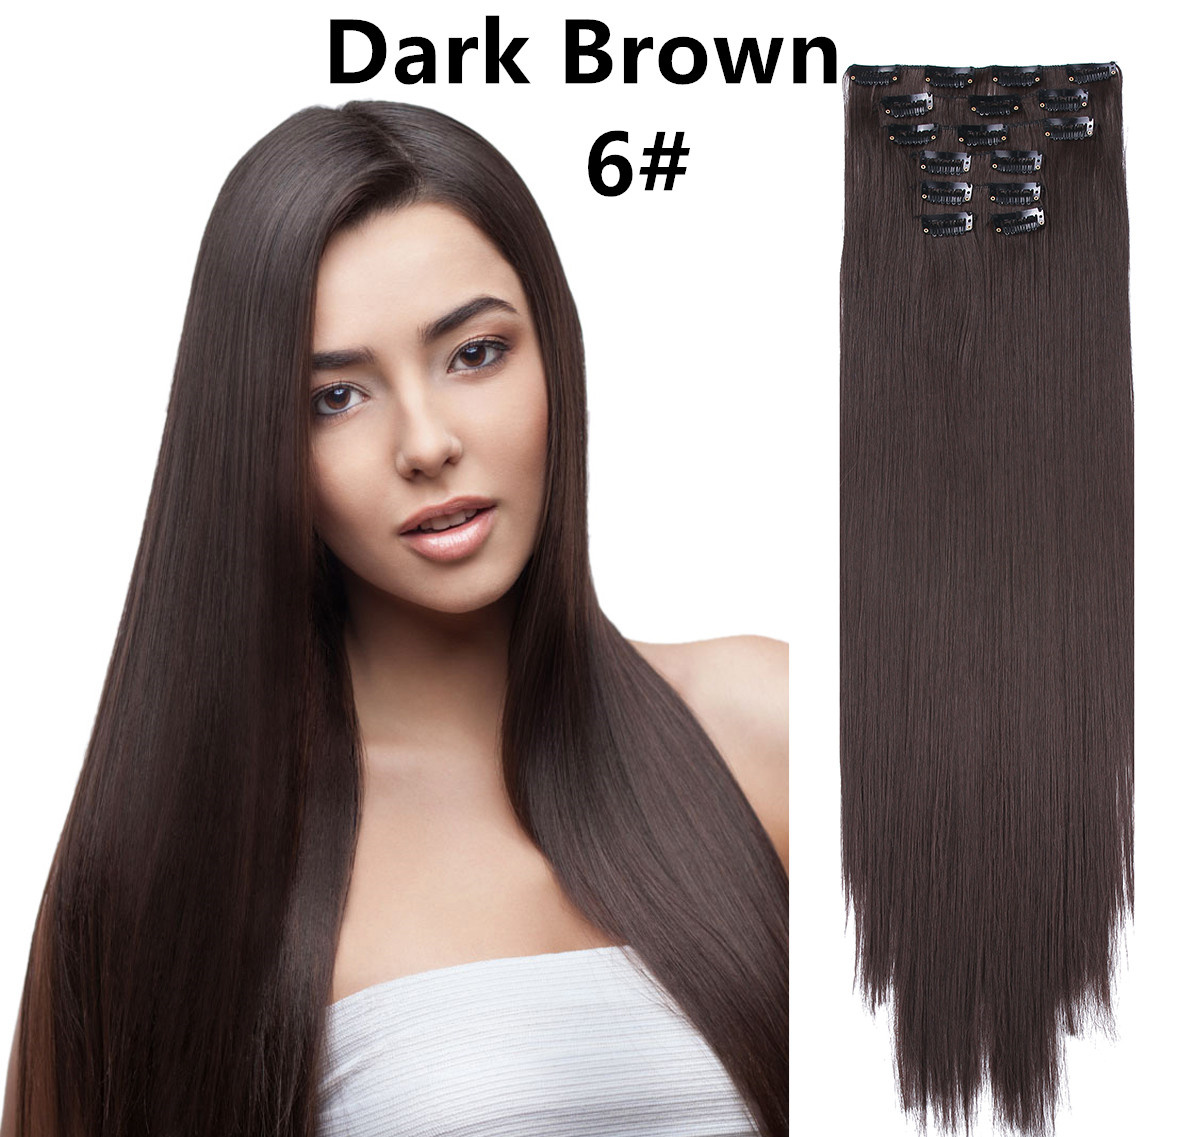 Synthetic Fiber Clip in Extensions- Straight (777)